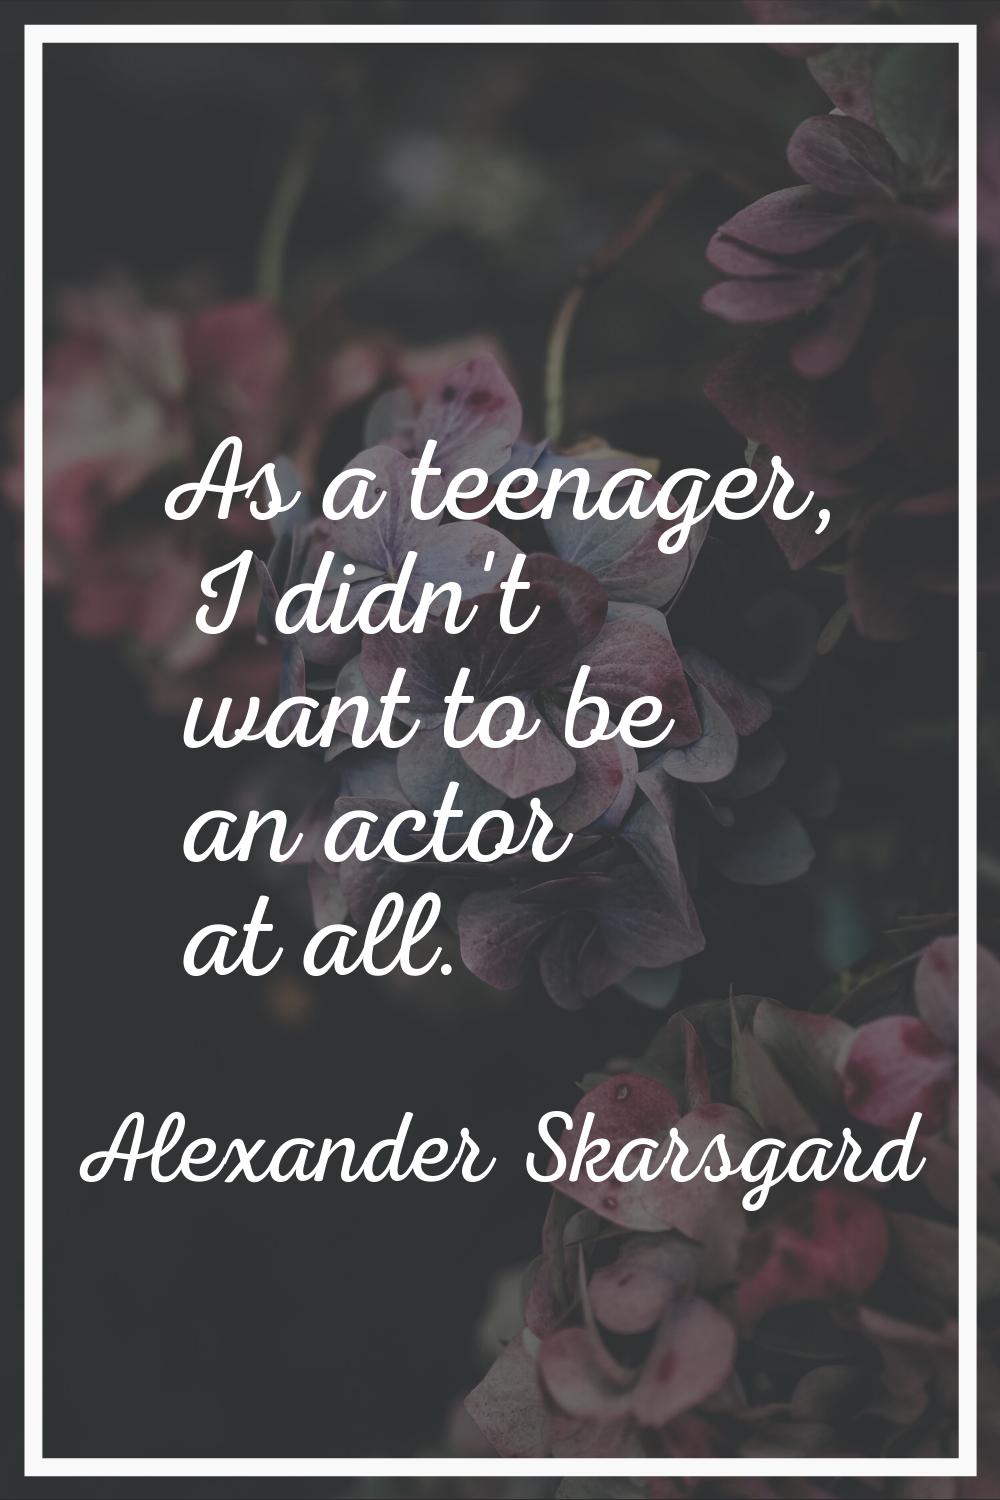 As a teenager, I didn't want to be an actor at all.